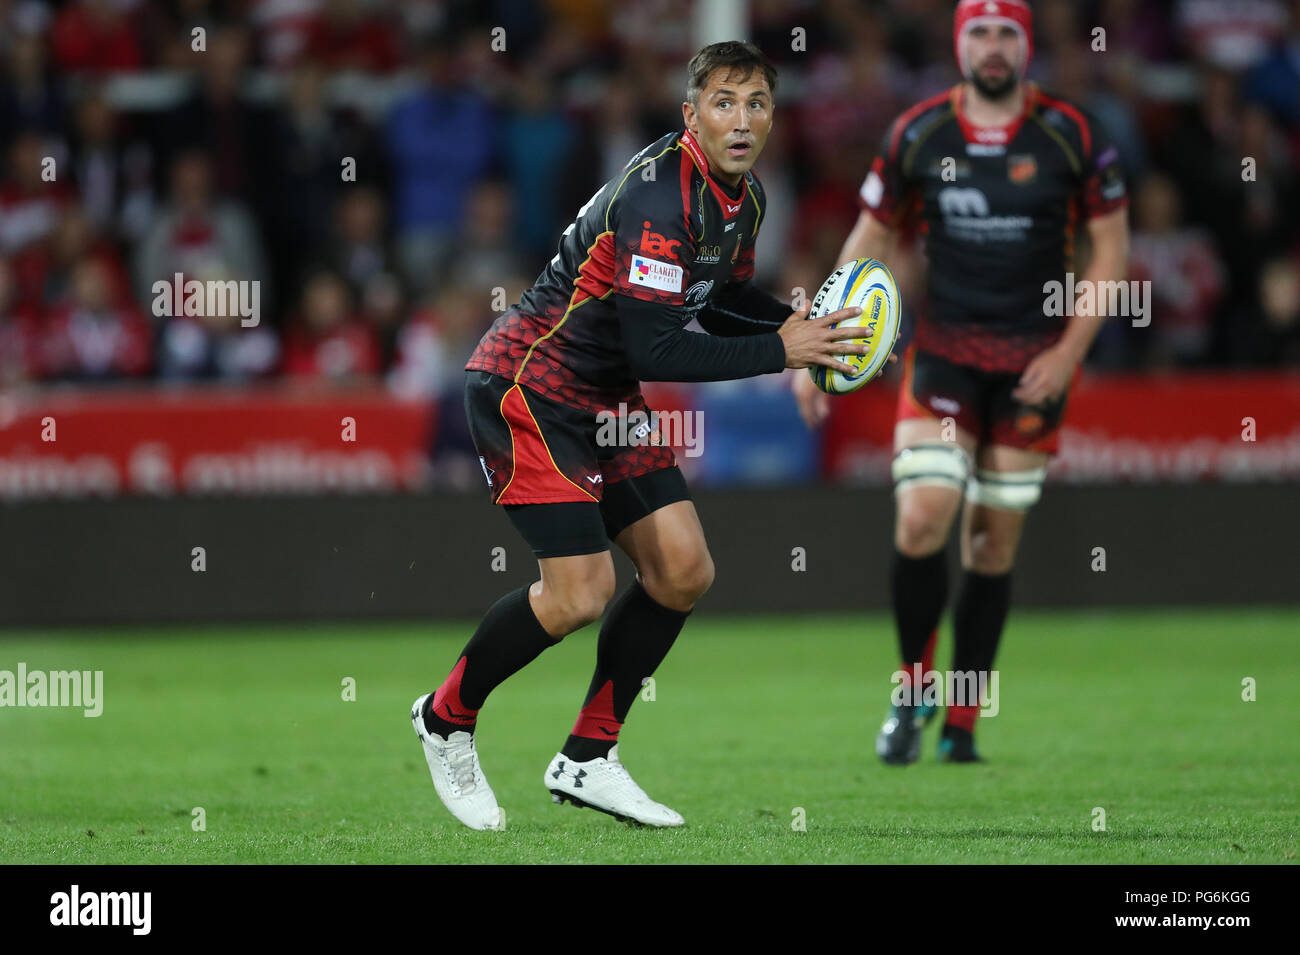 Dragons Gavin Henson during the pre-season friendly match at Kingsholm Stadium, Gloucester. PRESS ASSOCIATION Photo. Picture date: Thursday August 23, 2018. See PA story RUGBYU Gloucester. Photo credit should read: David Davies/PA Wire. RESTRICTIONS: Editorial use only. No commercial use. Stock Photo